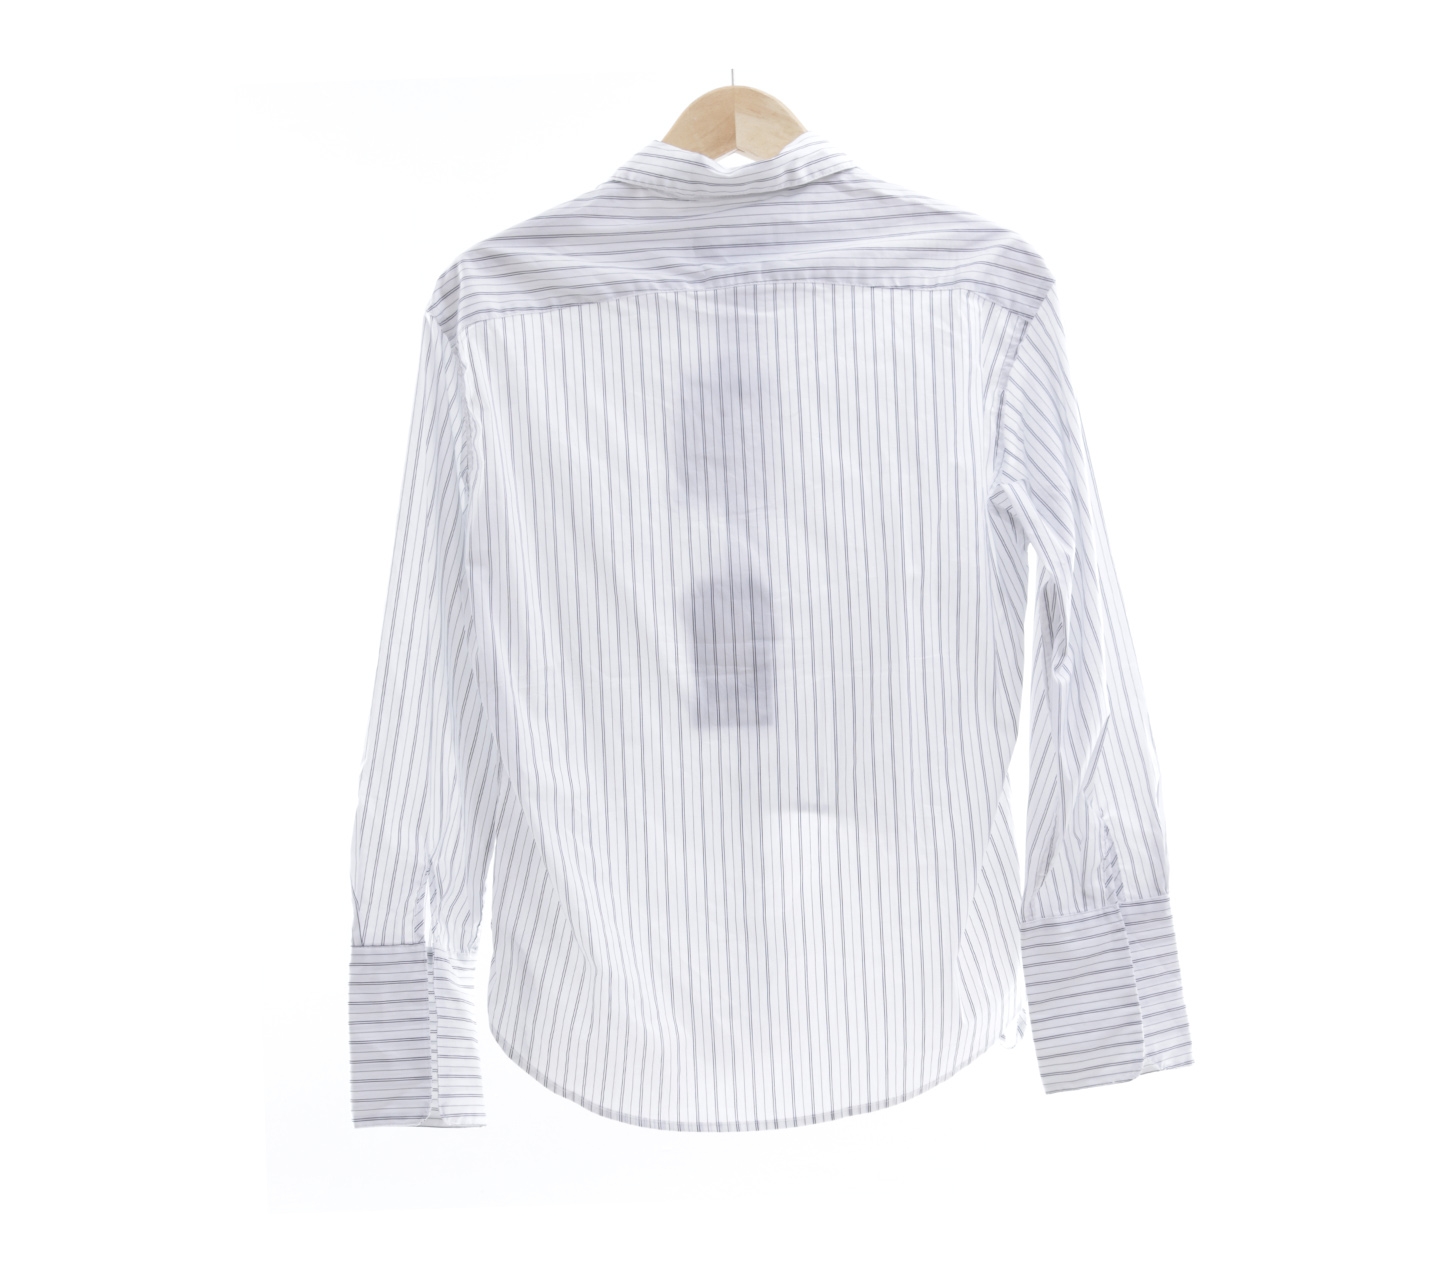 Andersson Bell White & Black Striped Shirt